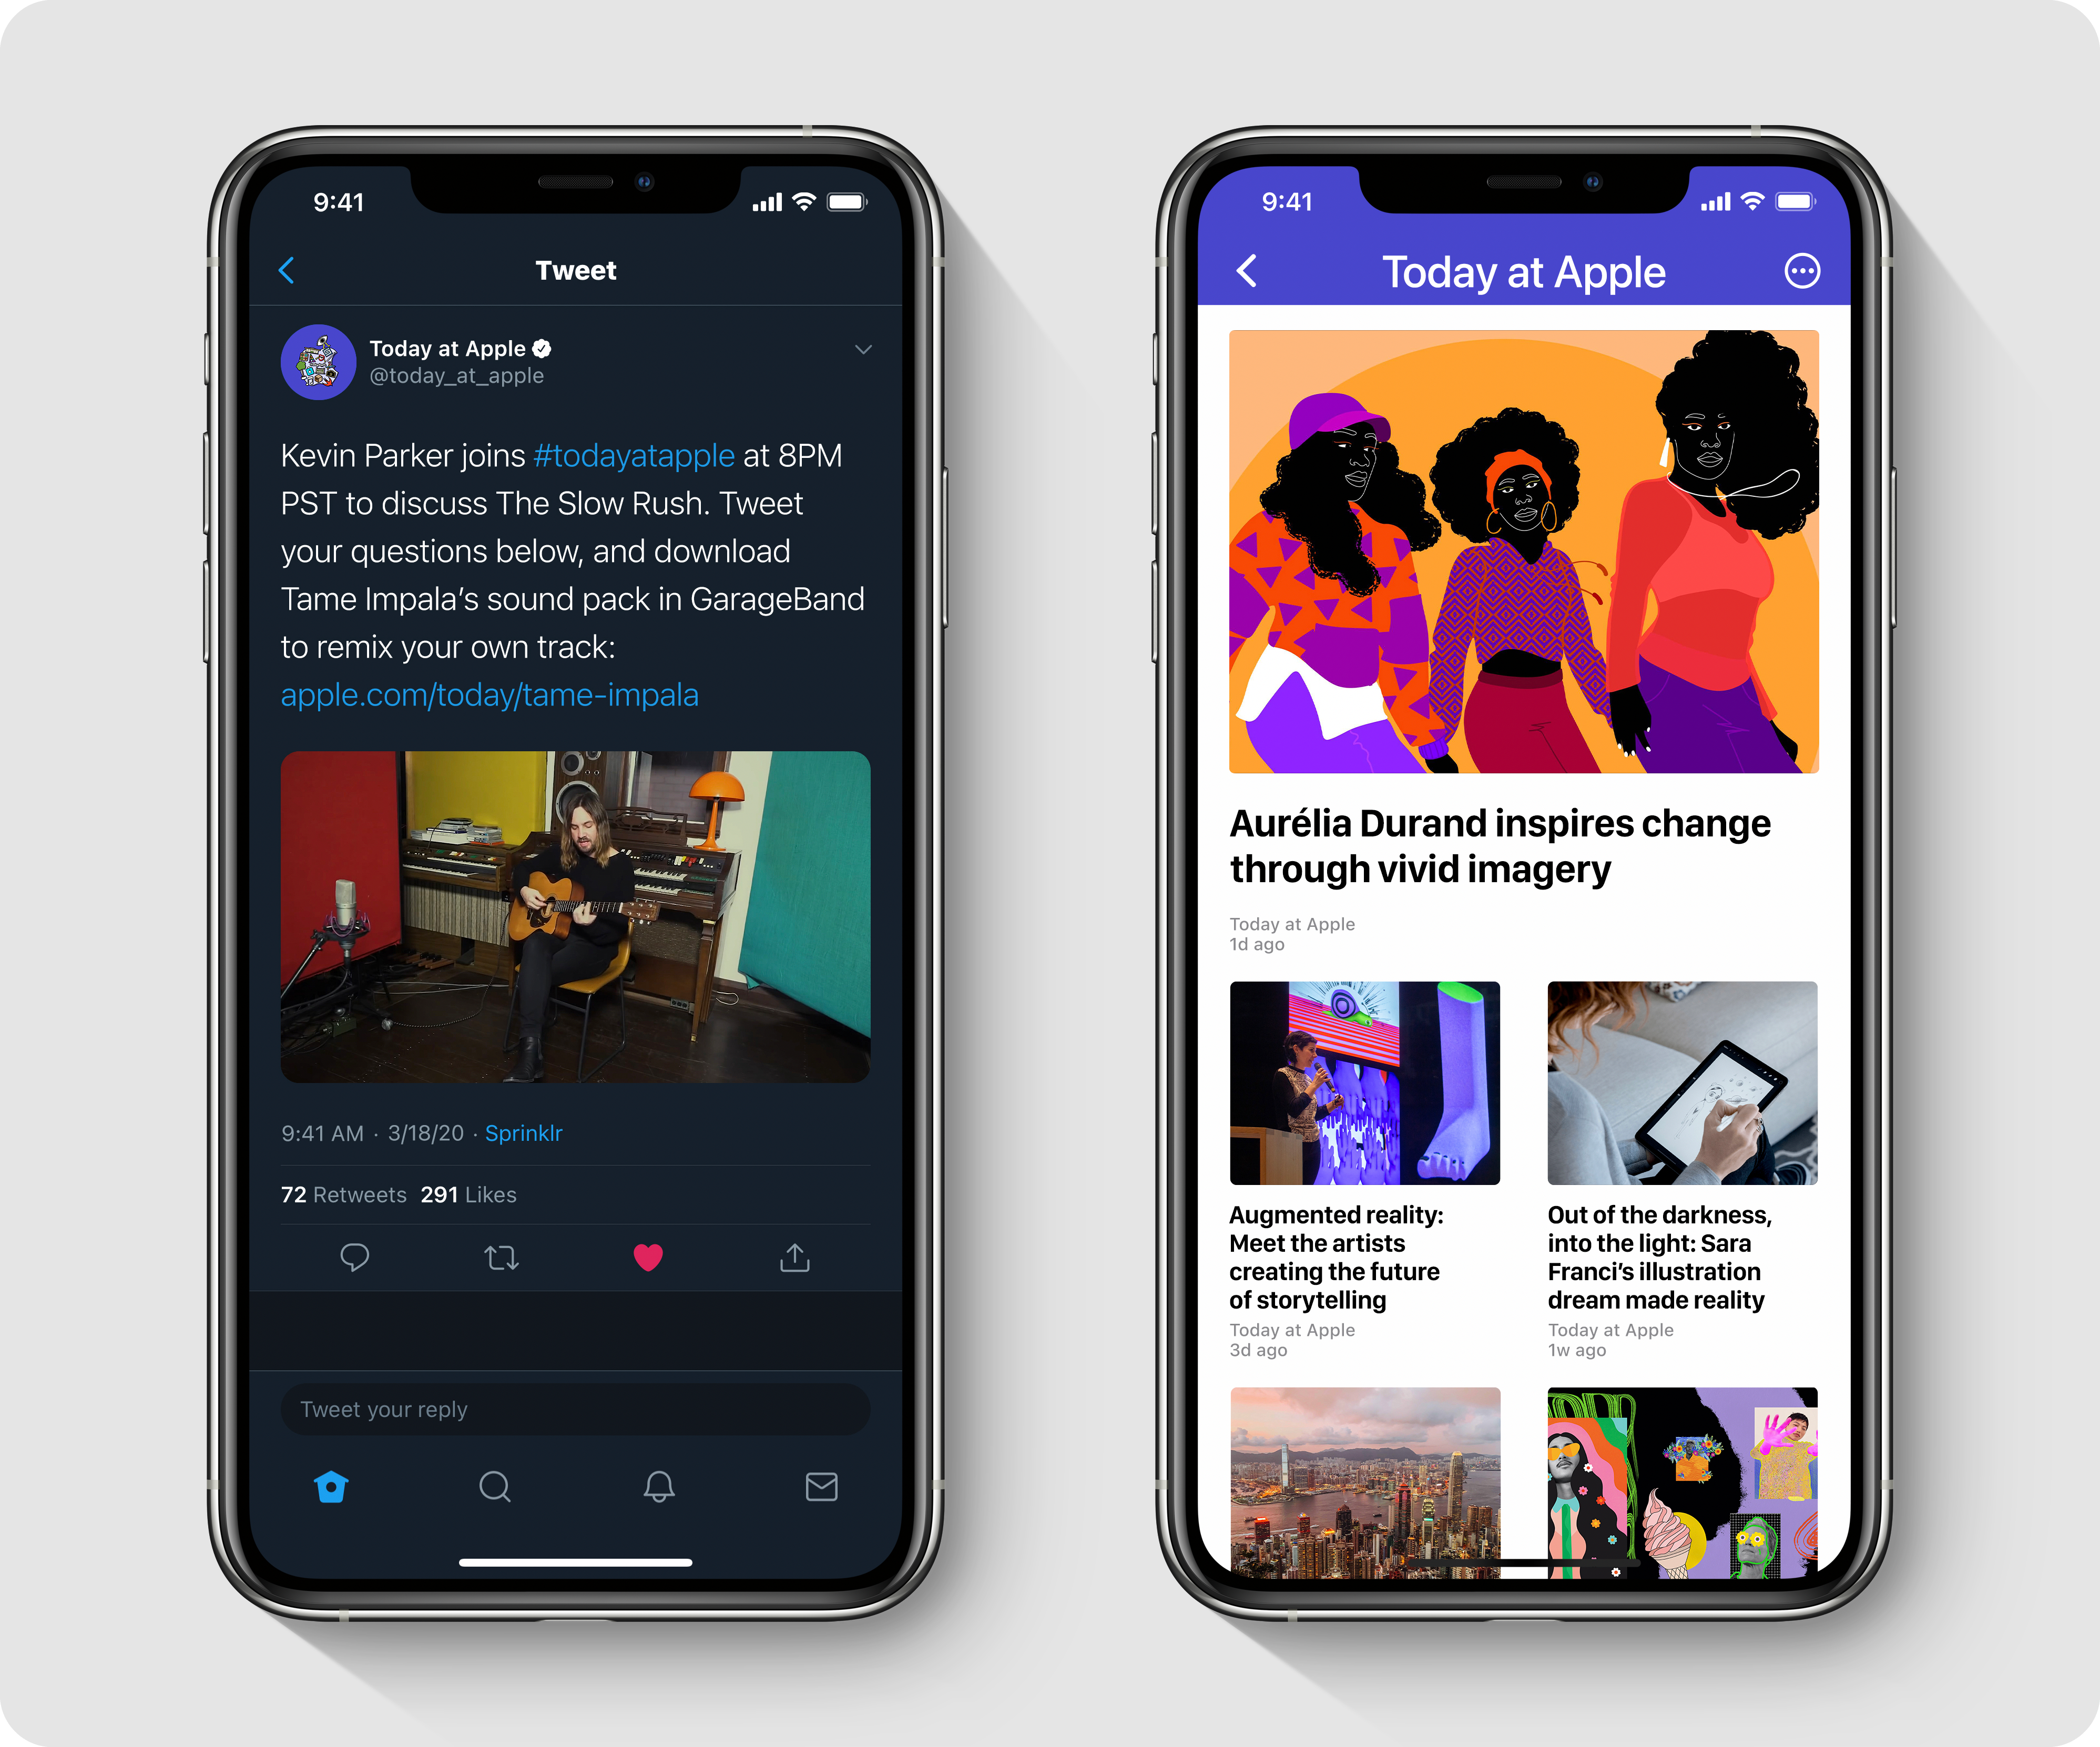 Today at Apple Online: Twitter